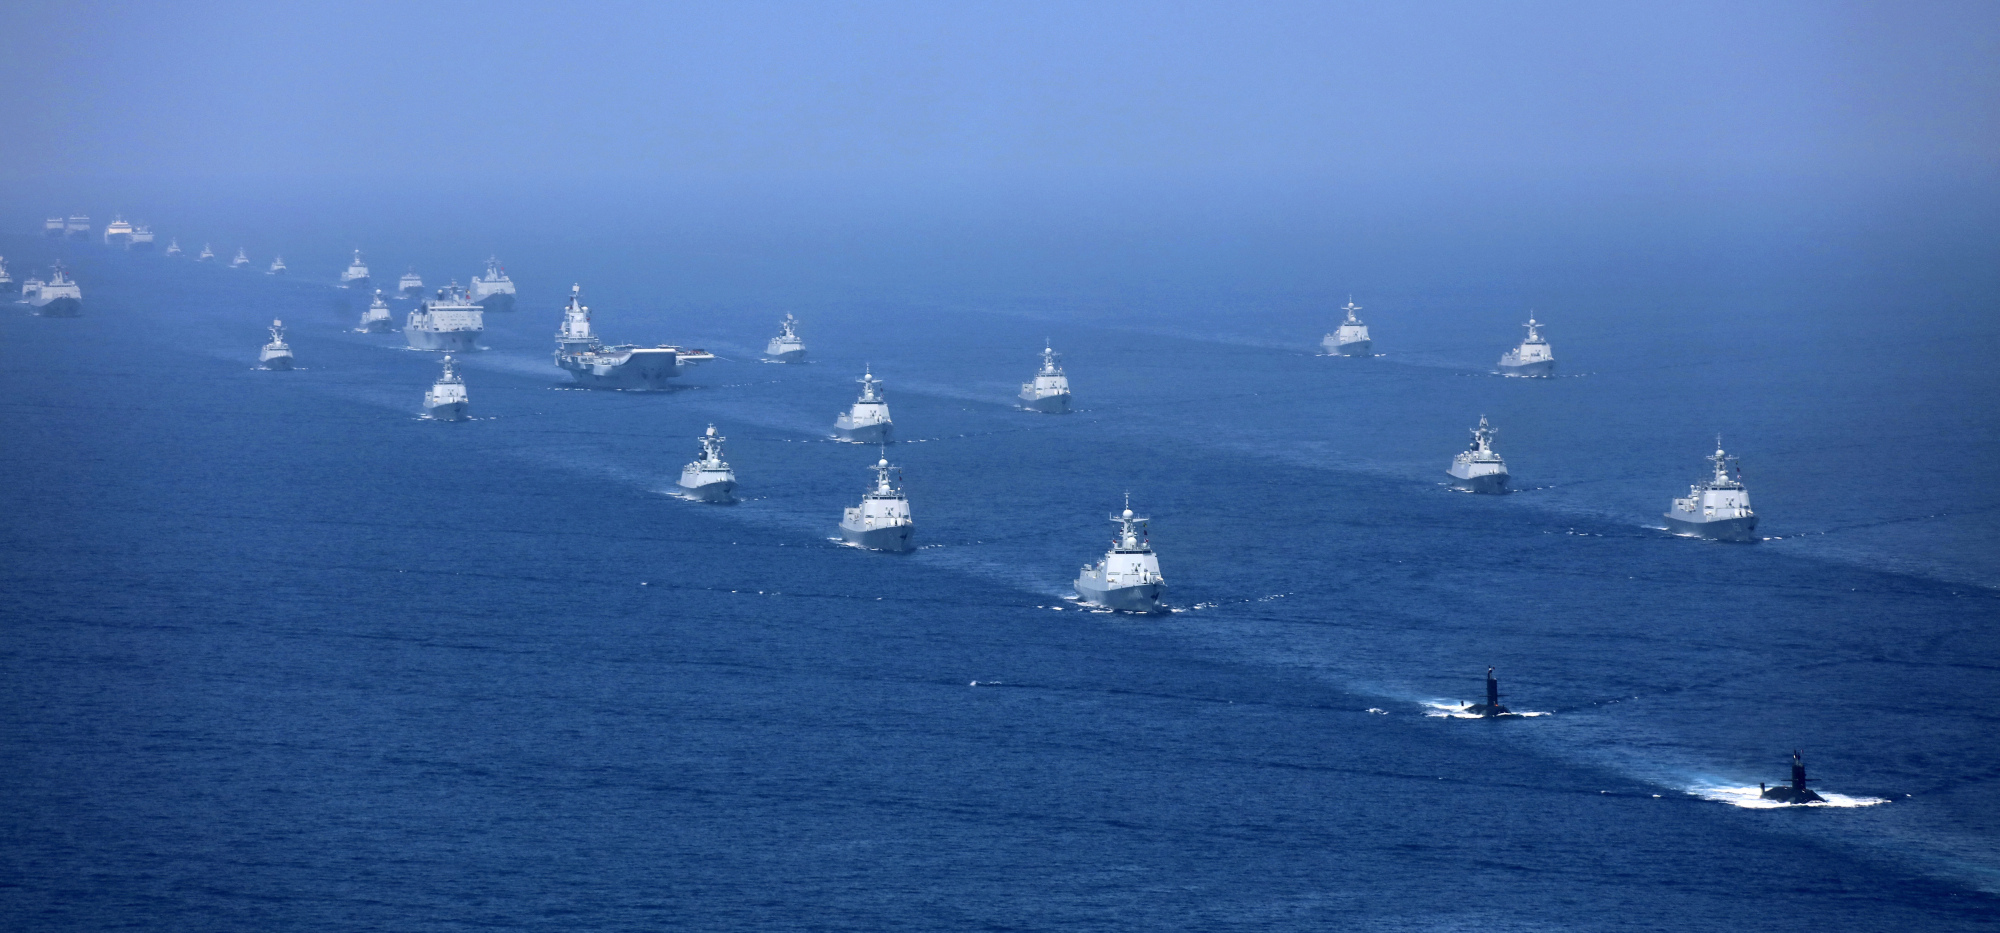 China's Liaoning aircraft carrier is accompanied by navy frigates and submarines conducting an exercises in the South China Sea in April. | AP